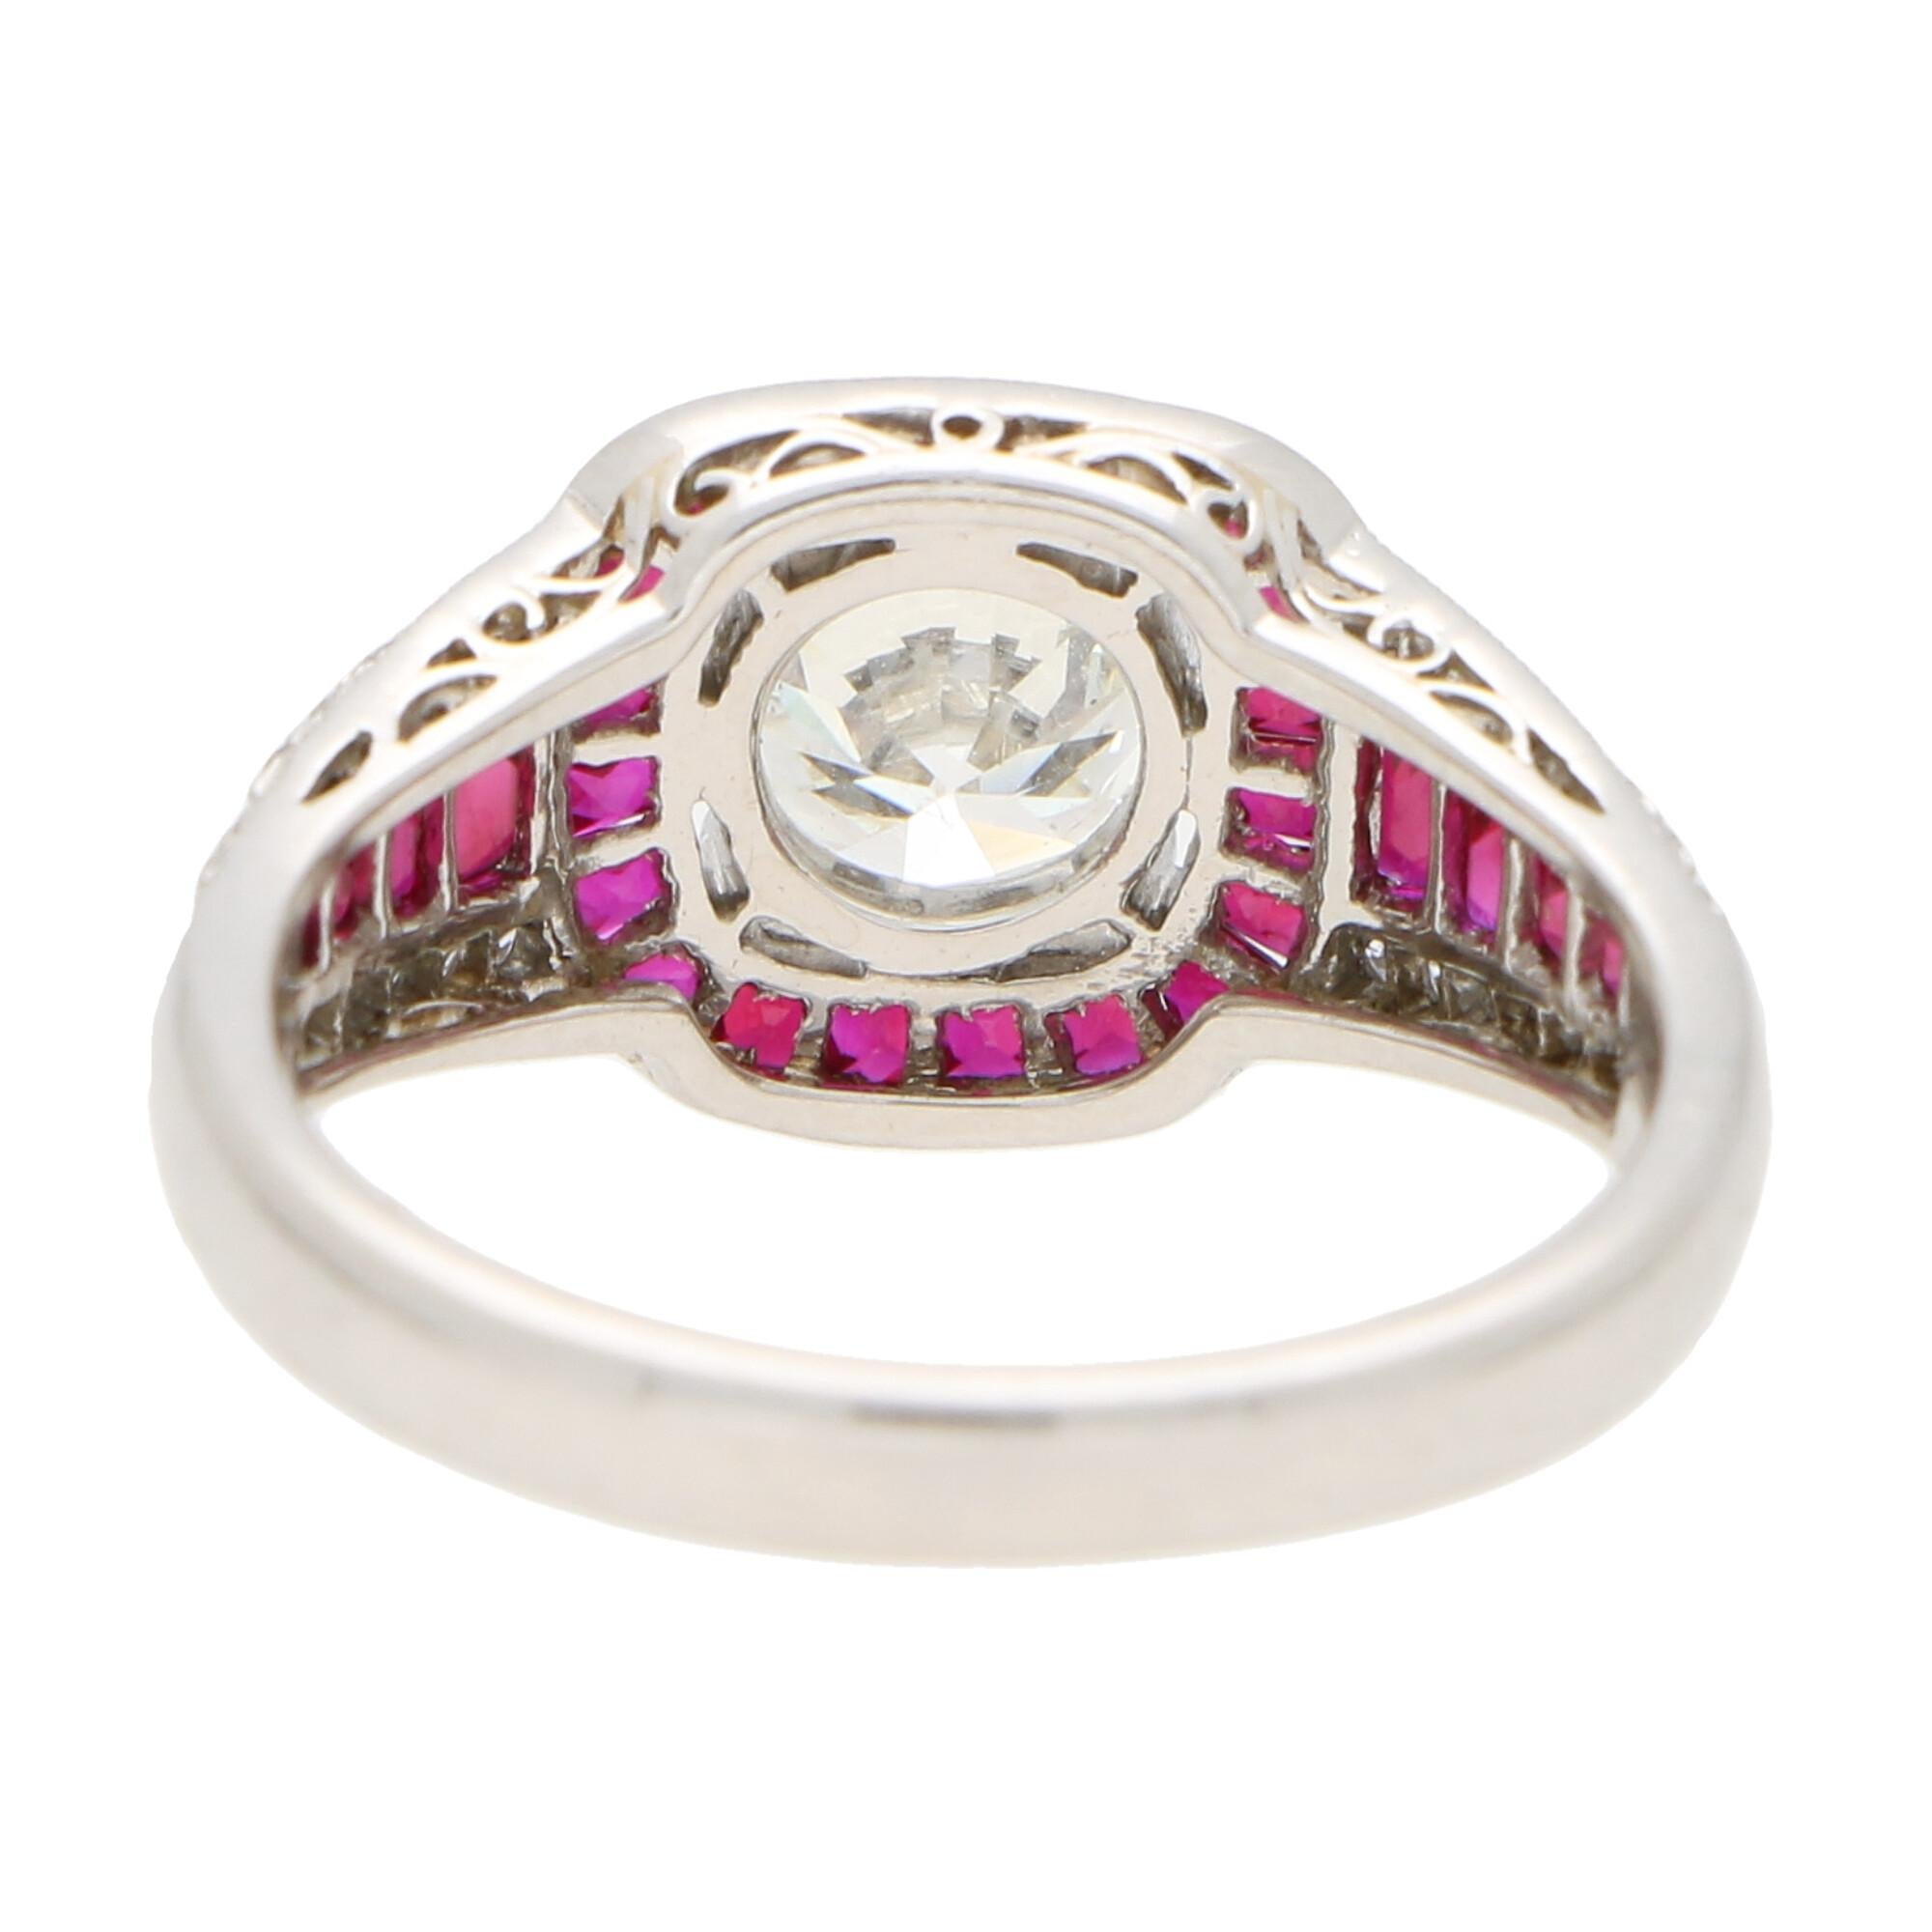 Round Cut Art Deco Inspired Ruby and Diamond Target Engagement Dress Ring Set in Platinum